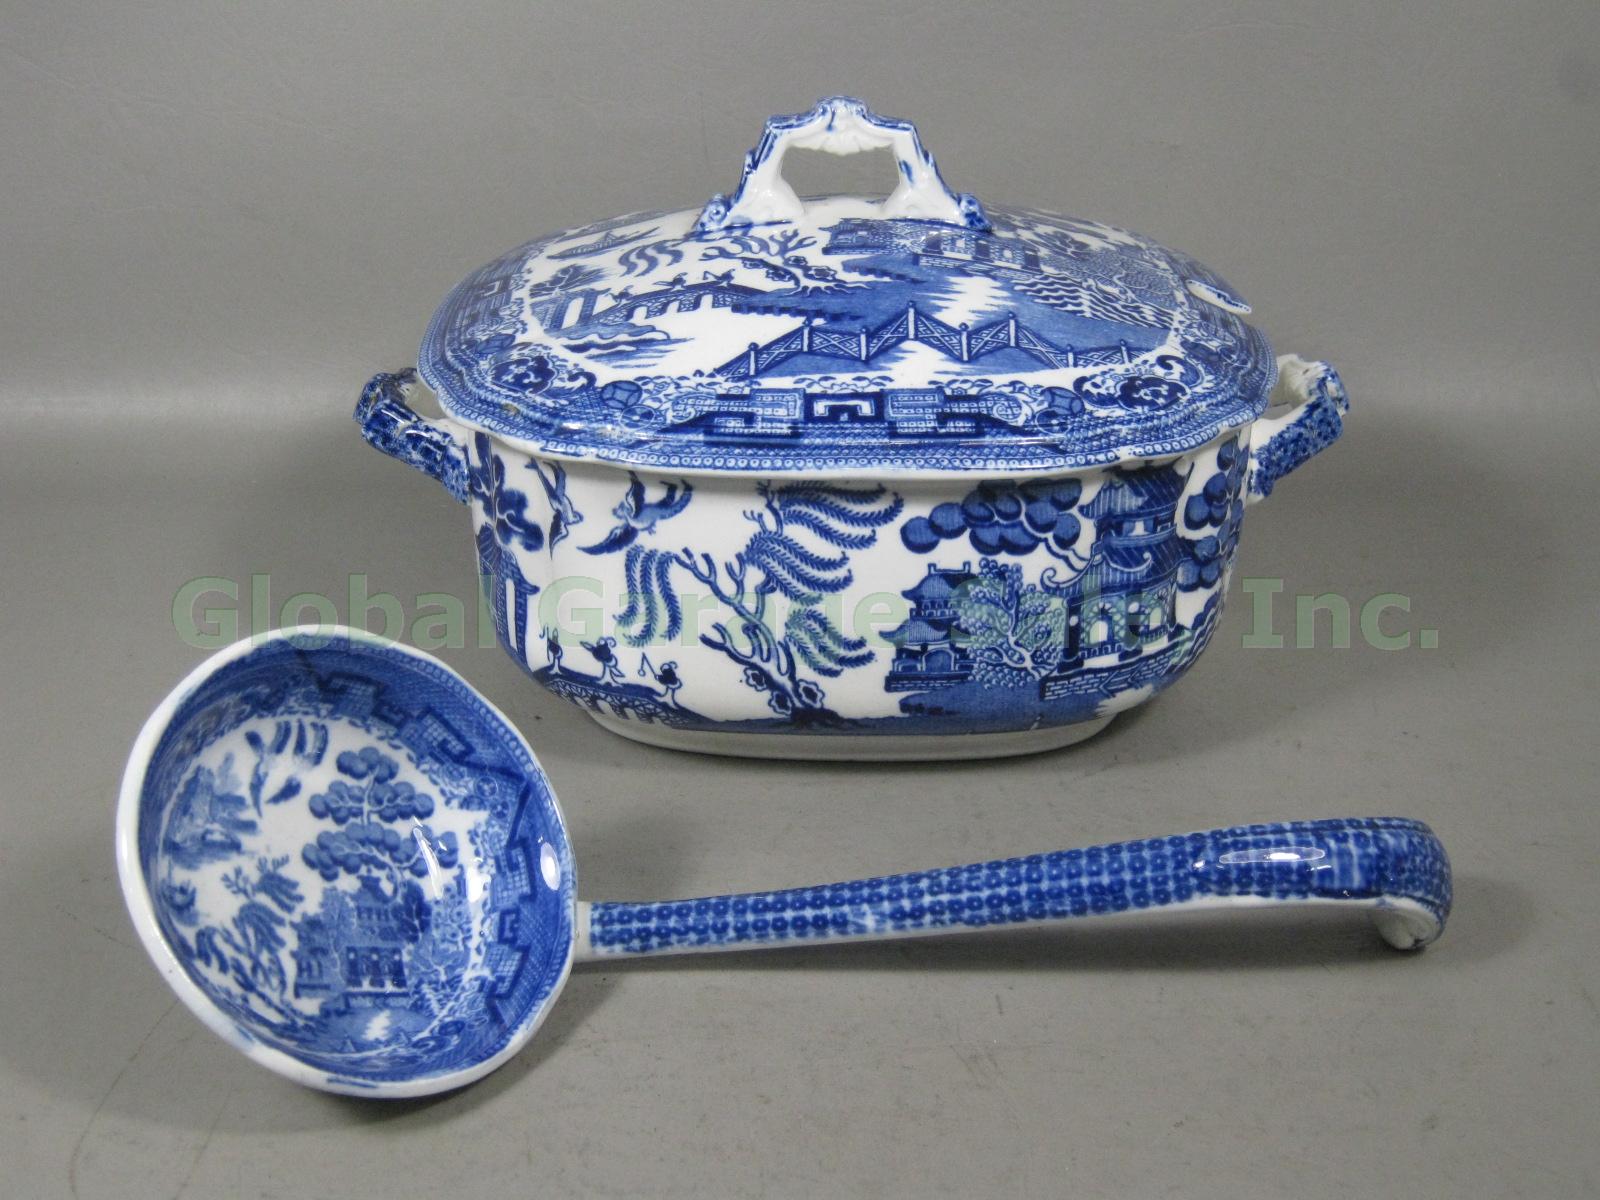 Antique Wedgwood Blue Willow 9" Soup Tureen + Ladle Transferware England EXC! NR